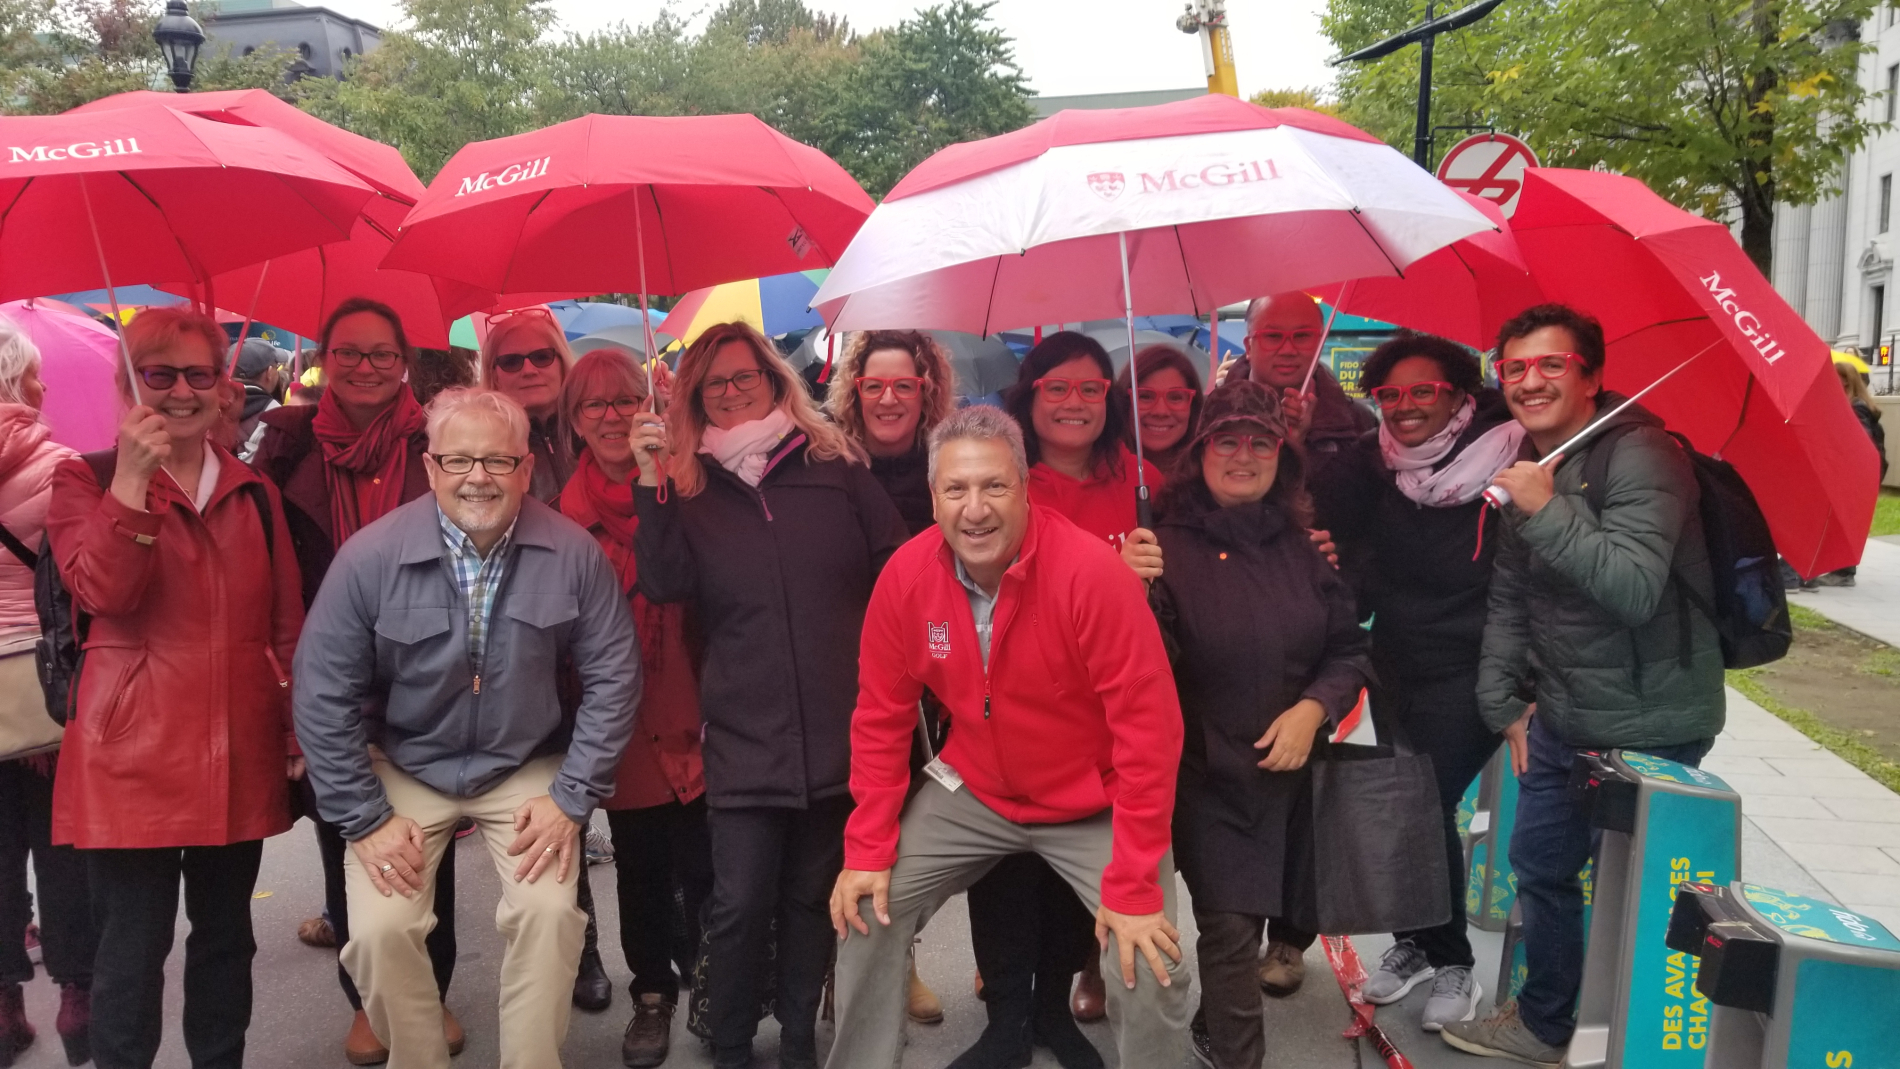 Centraide Committee Members at the March of the Umbrellas Launch Event in 2019